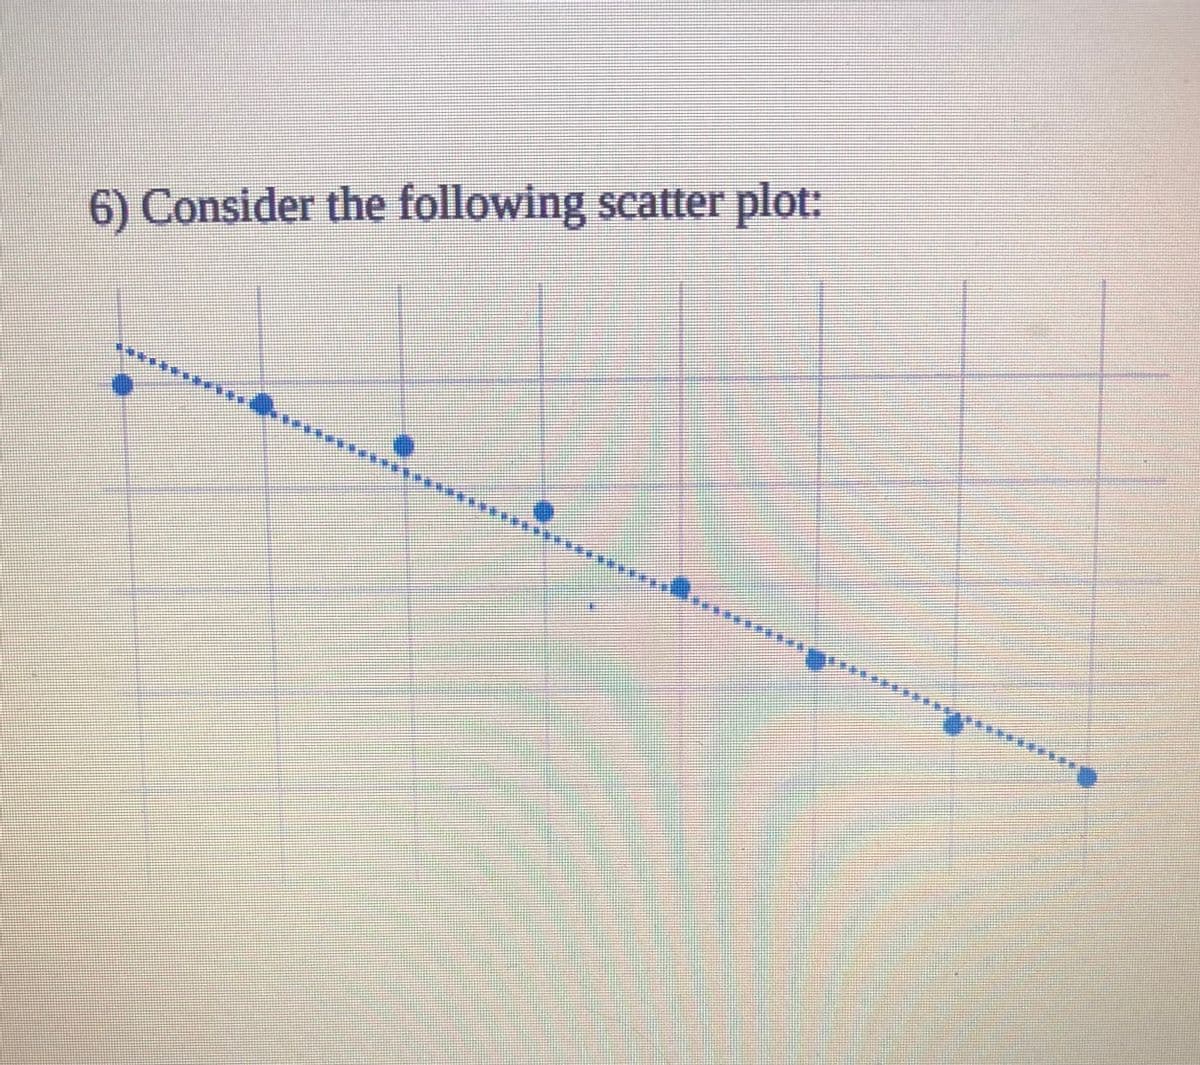 6) Consider the following scatter plot:
